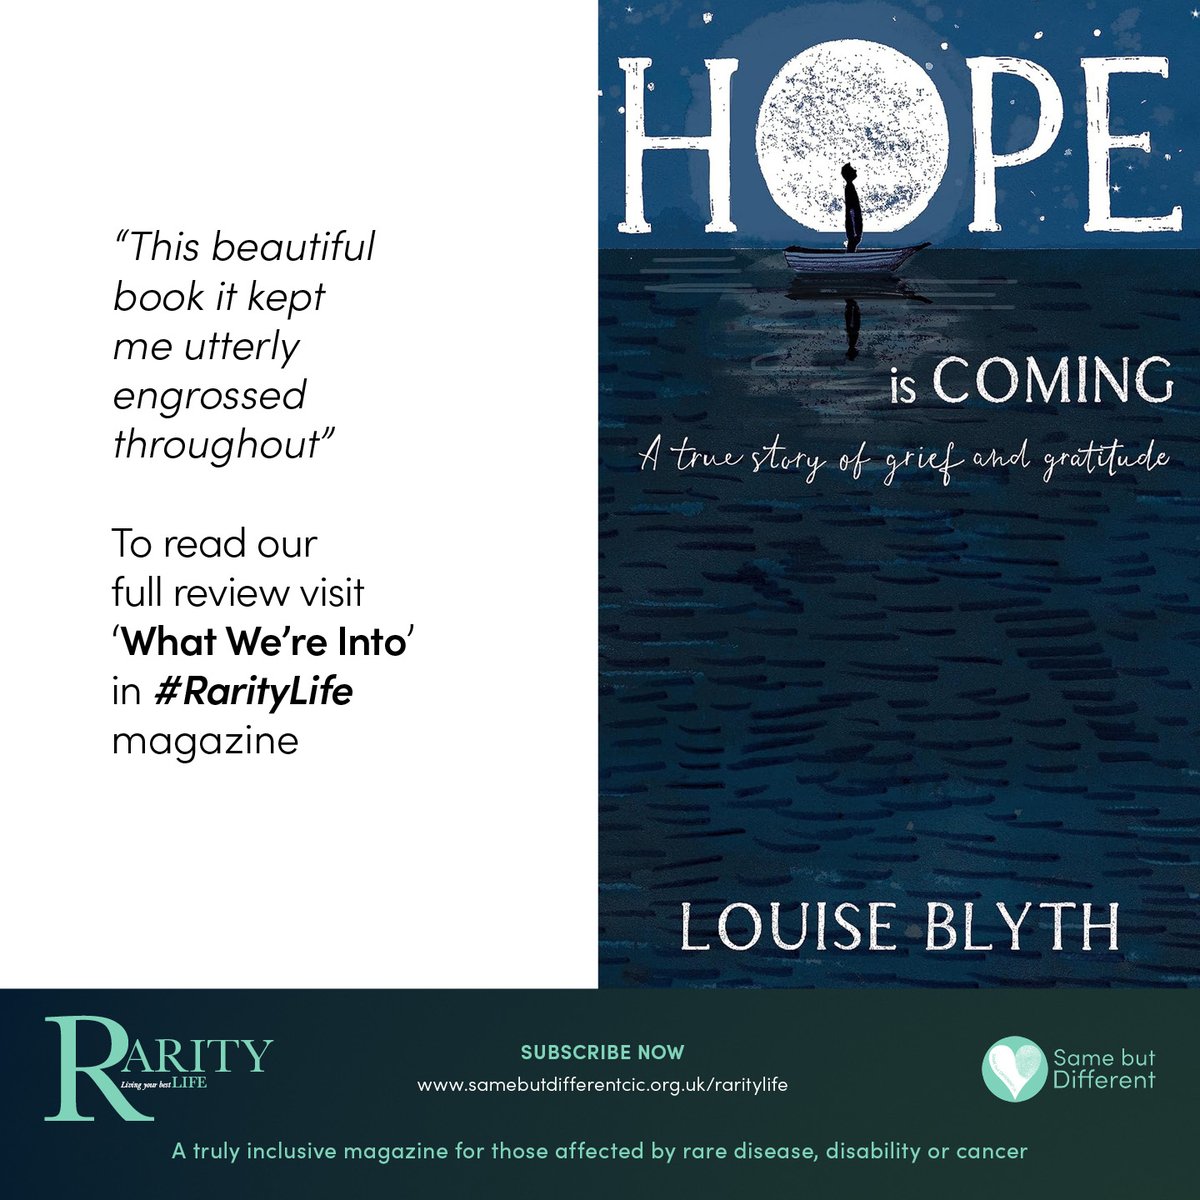 “How can you lose the love of your life, but gain the greatest love you can ever know?” Louise Blyth To read our latest book review in the regular ‘What We’re Into' feature visit #RarityLife below: samebutdifferentcic.org.uk/raritylife #cancer #grief #nationallottery @blyth_louise